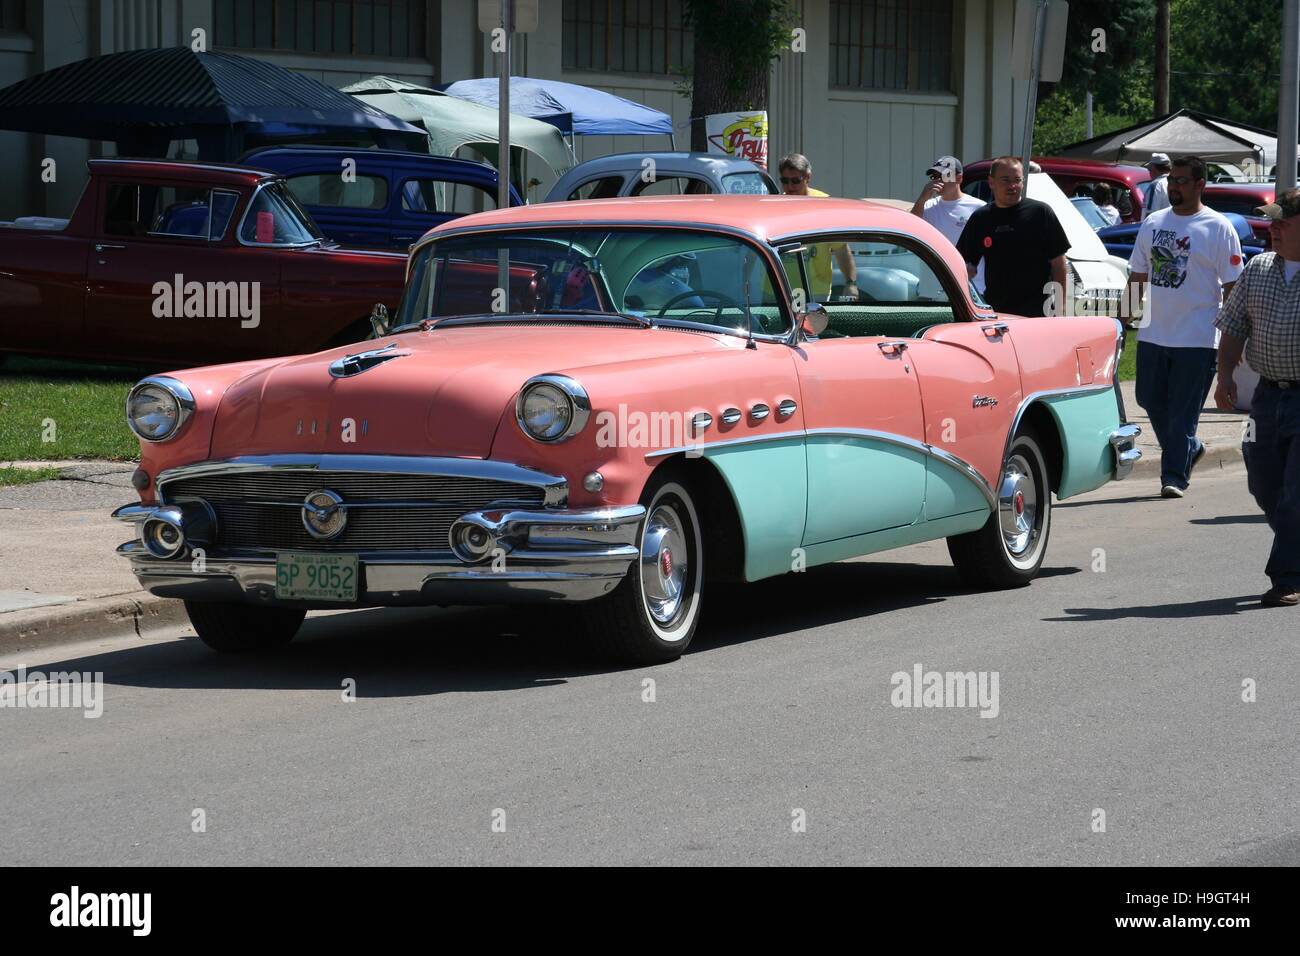 A 1956 coral pink and aqua green Buick Century Hardtop at the 'Back to the 50's Car Show' on the Minnesota State Fairgrounds Stock Photo